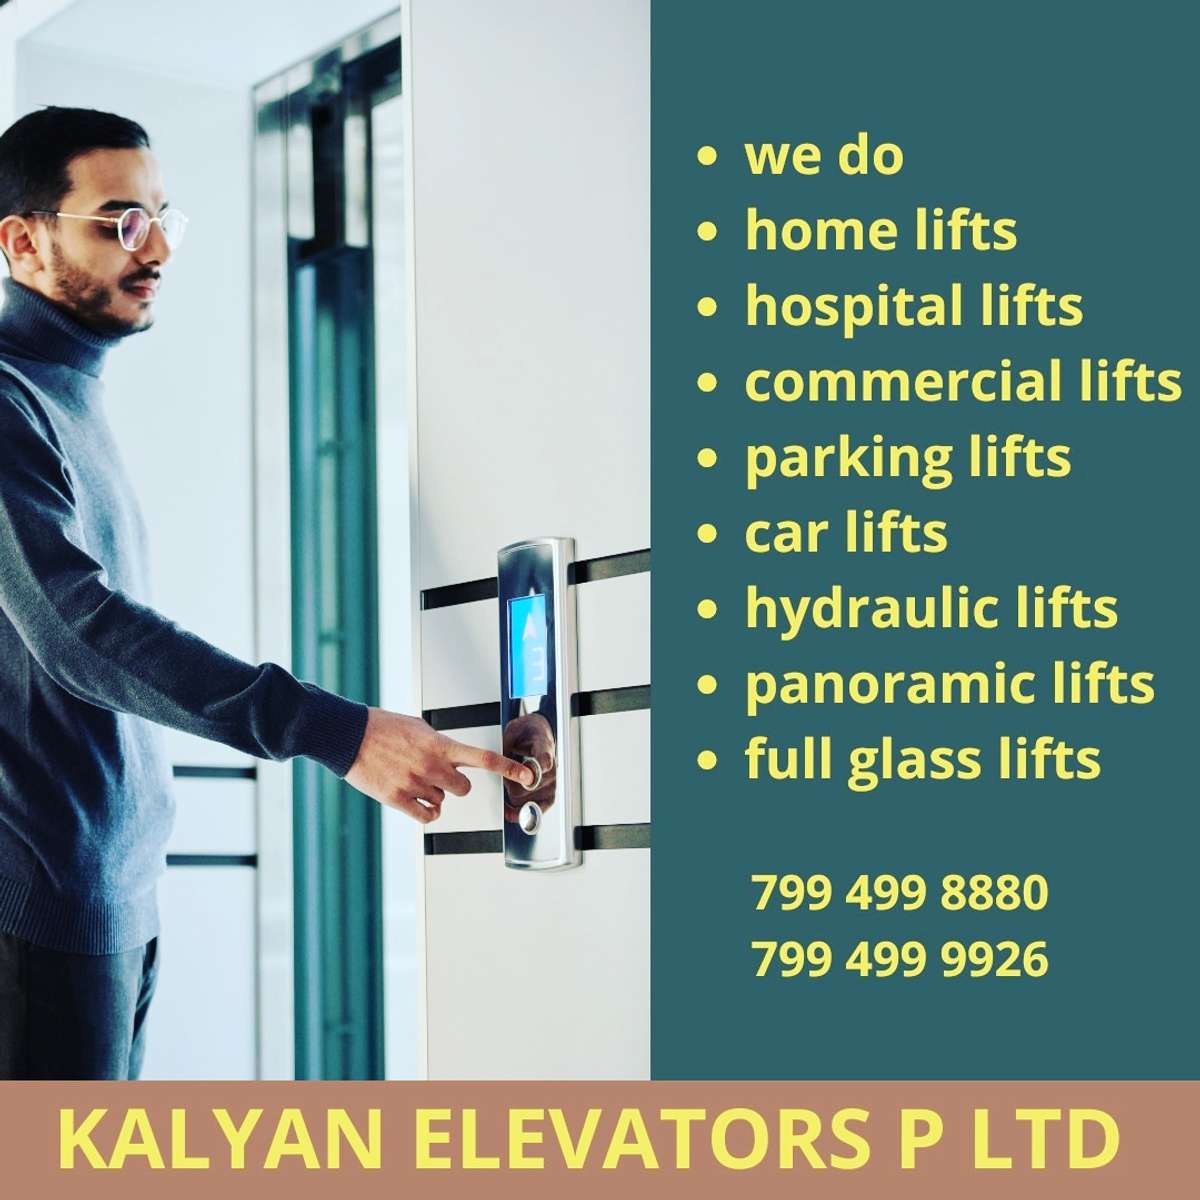 related building passenger lifts
consider my company please